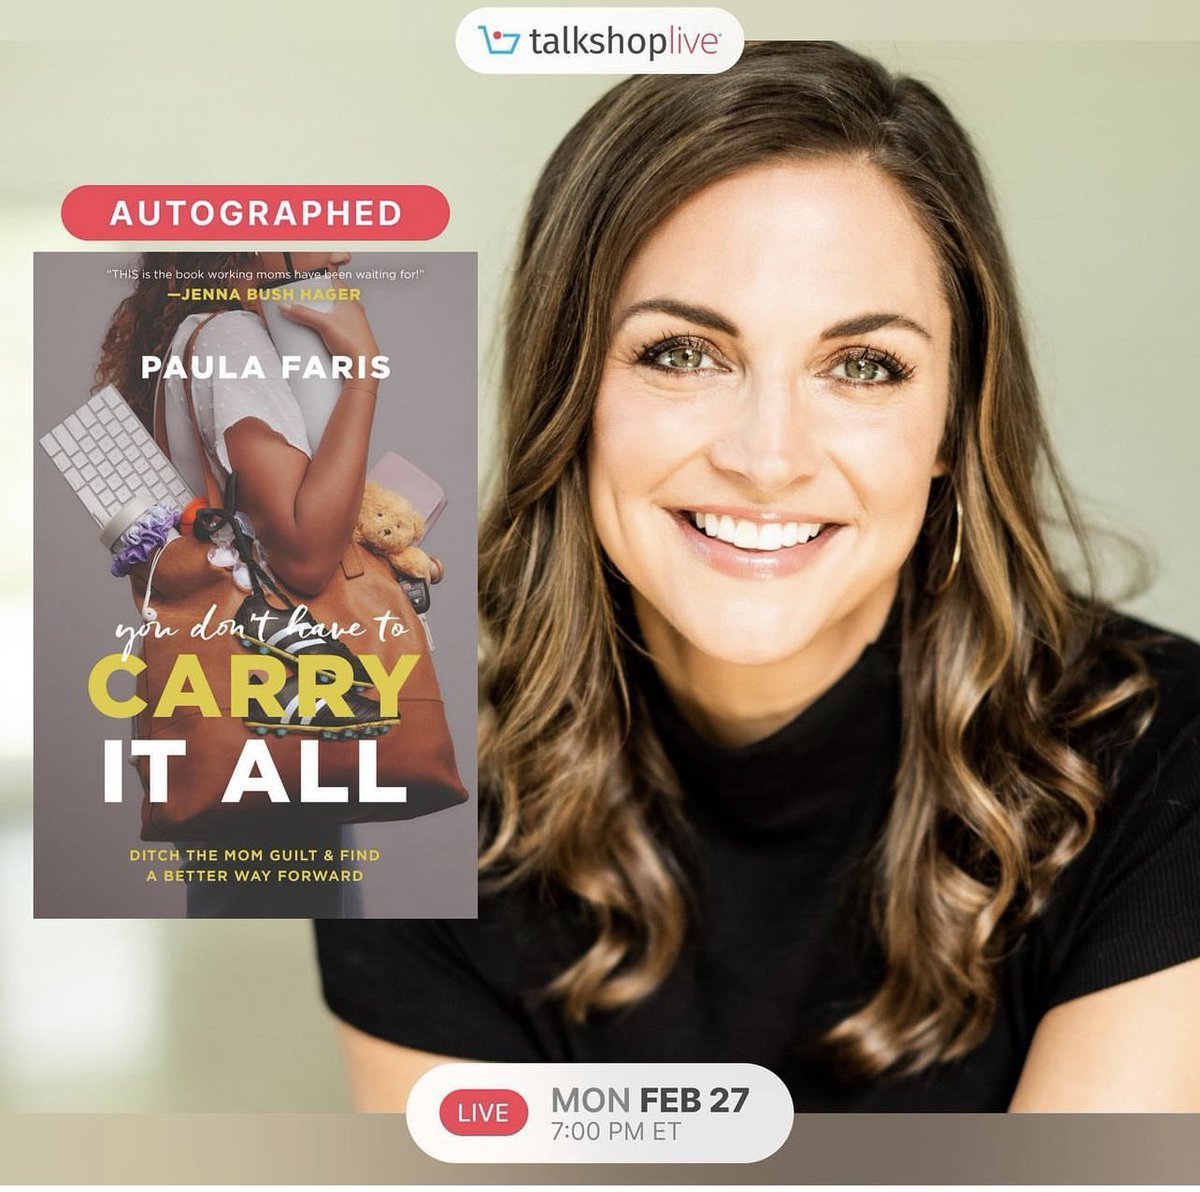 Join me tomorrow night for this online event: get an autographed copy of my new book, plus I’ll be answering all your questions in Q&A and giving away $500 in Target gift cards! Link here: talkshop.live/watch/ia4ShAcf…